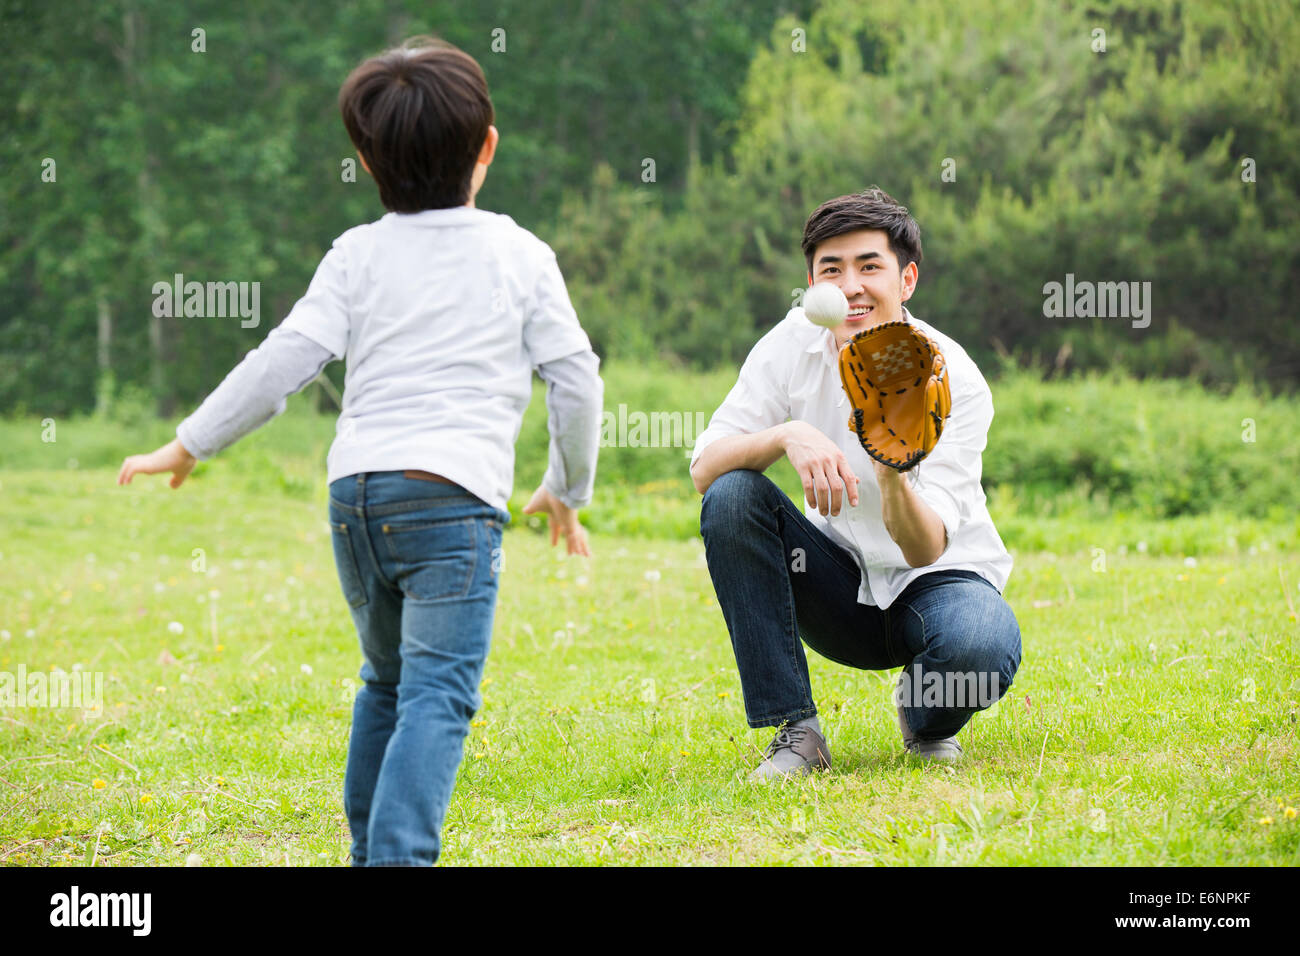 Father and son playing baseball Stock Photo